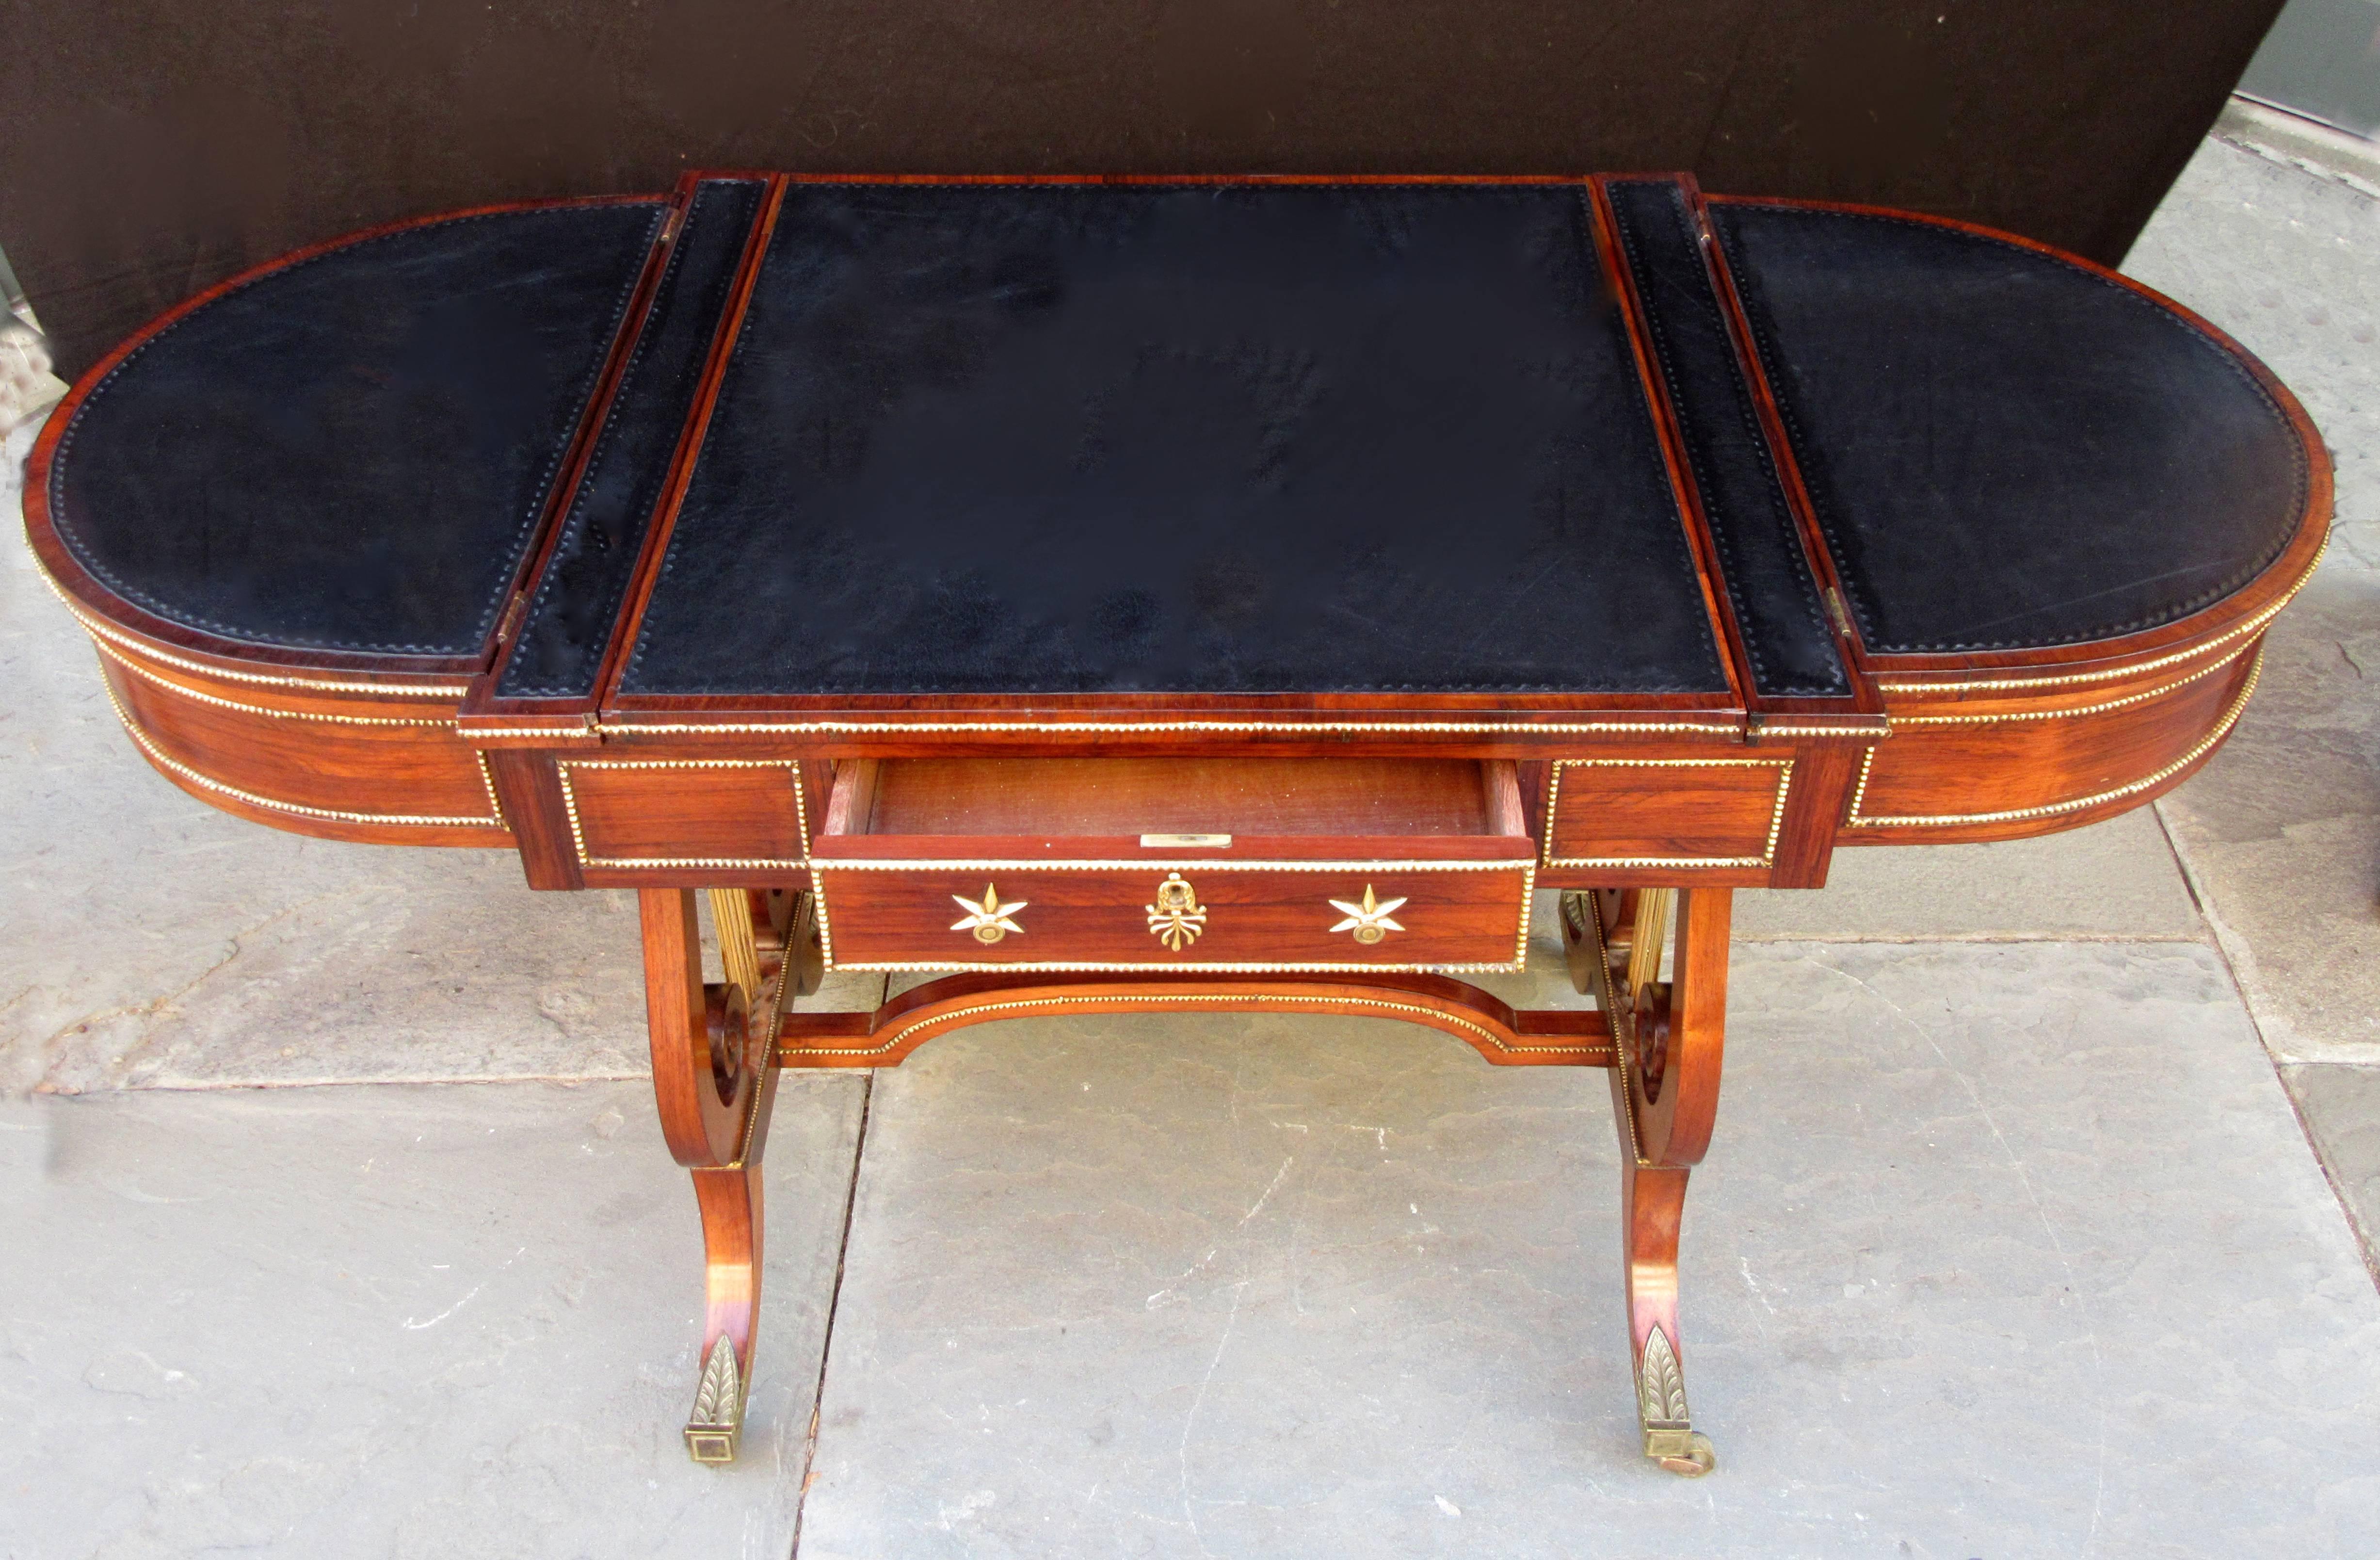 Appliqué 19th Century English Regency Rosewood Sofa Gaming Table Attributed to Gillows